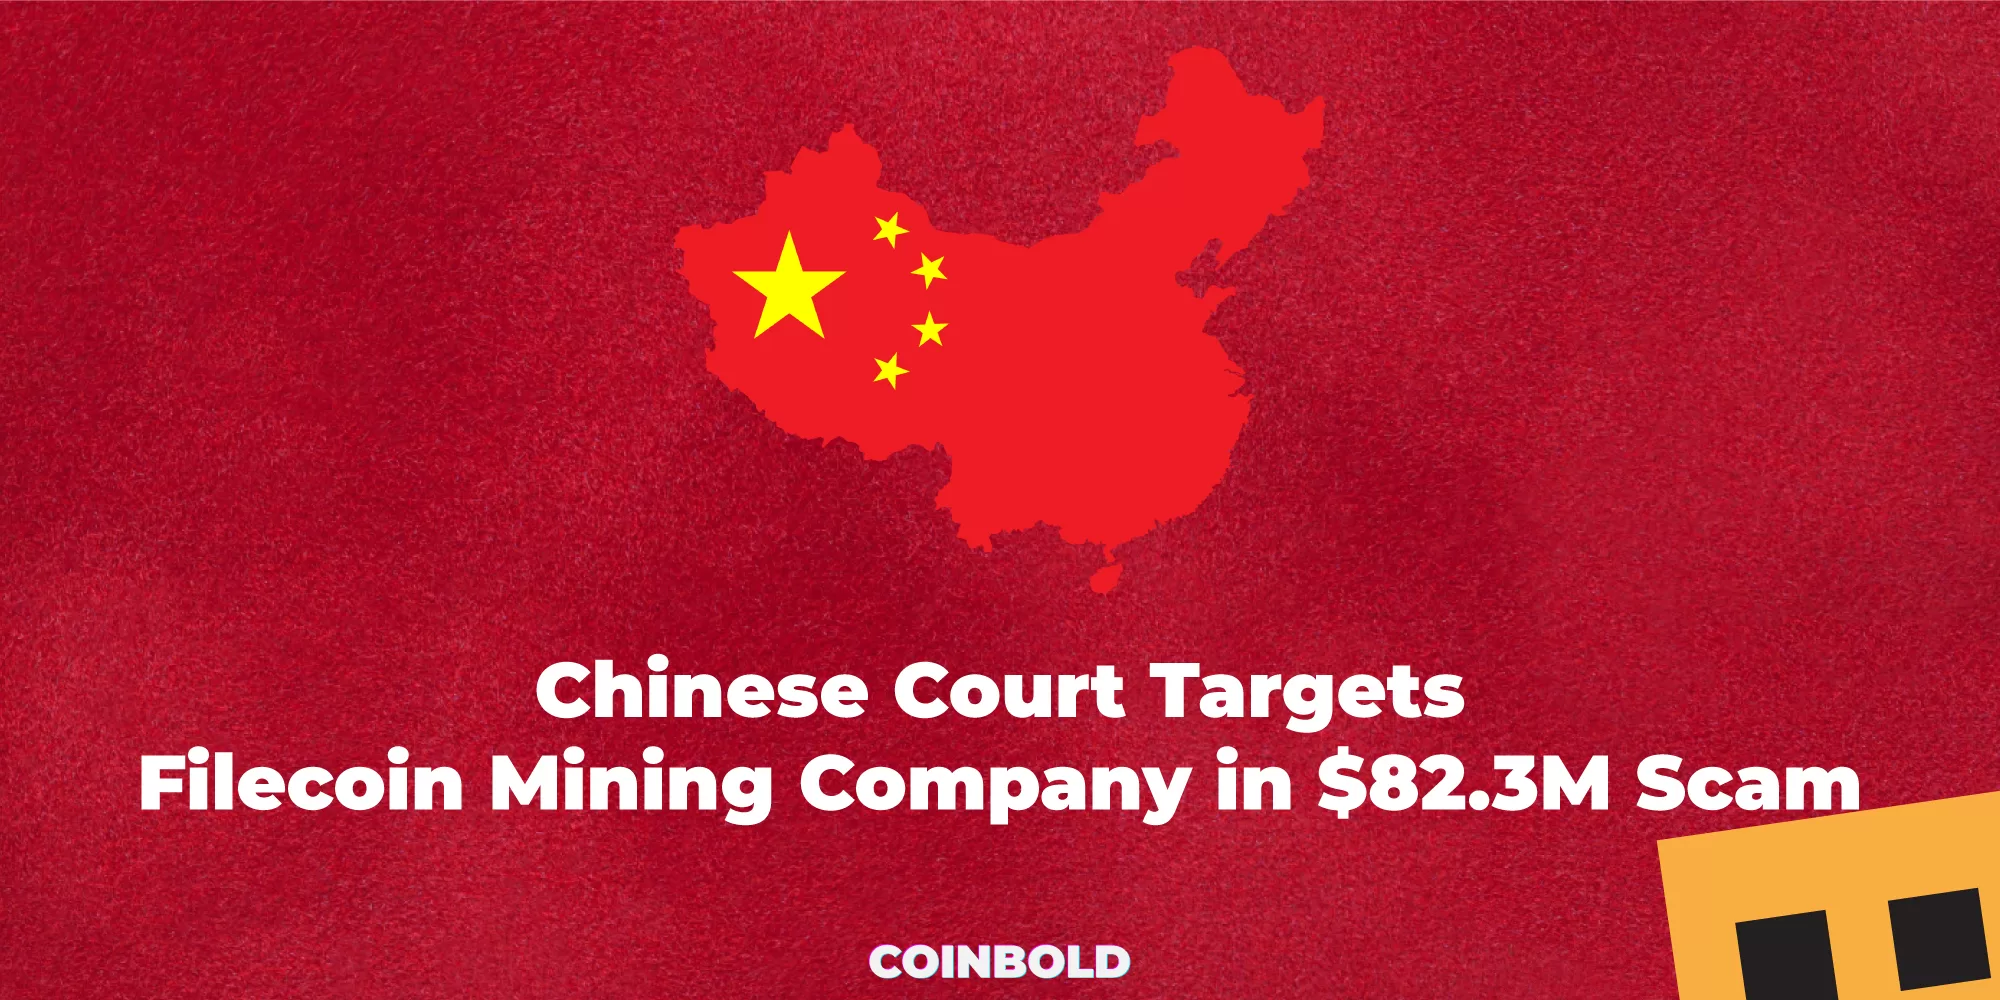 Chinese Court Targets Filecoin Mining Company in $82.3M Scam